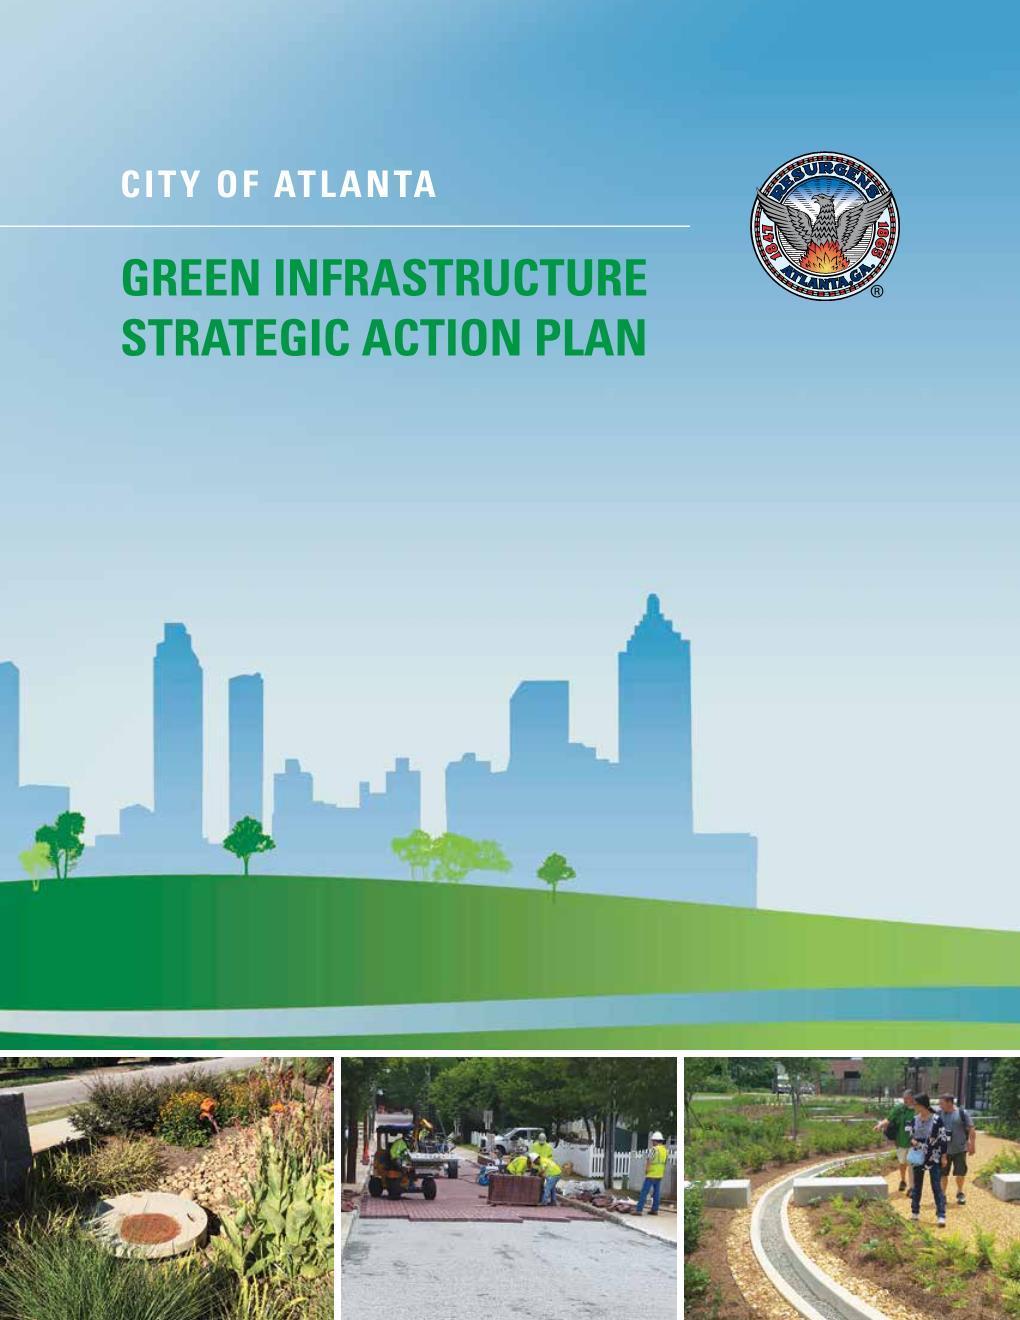 Metro Atlanta Goal Reduction of runoff volume and pollutant load Aesthetic improvement/revitalization Opportunistic project implementation Policy, funding, and planning